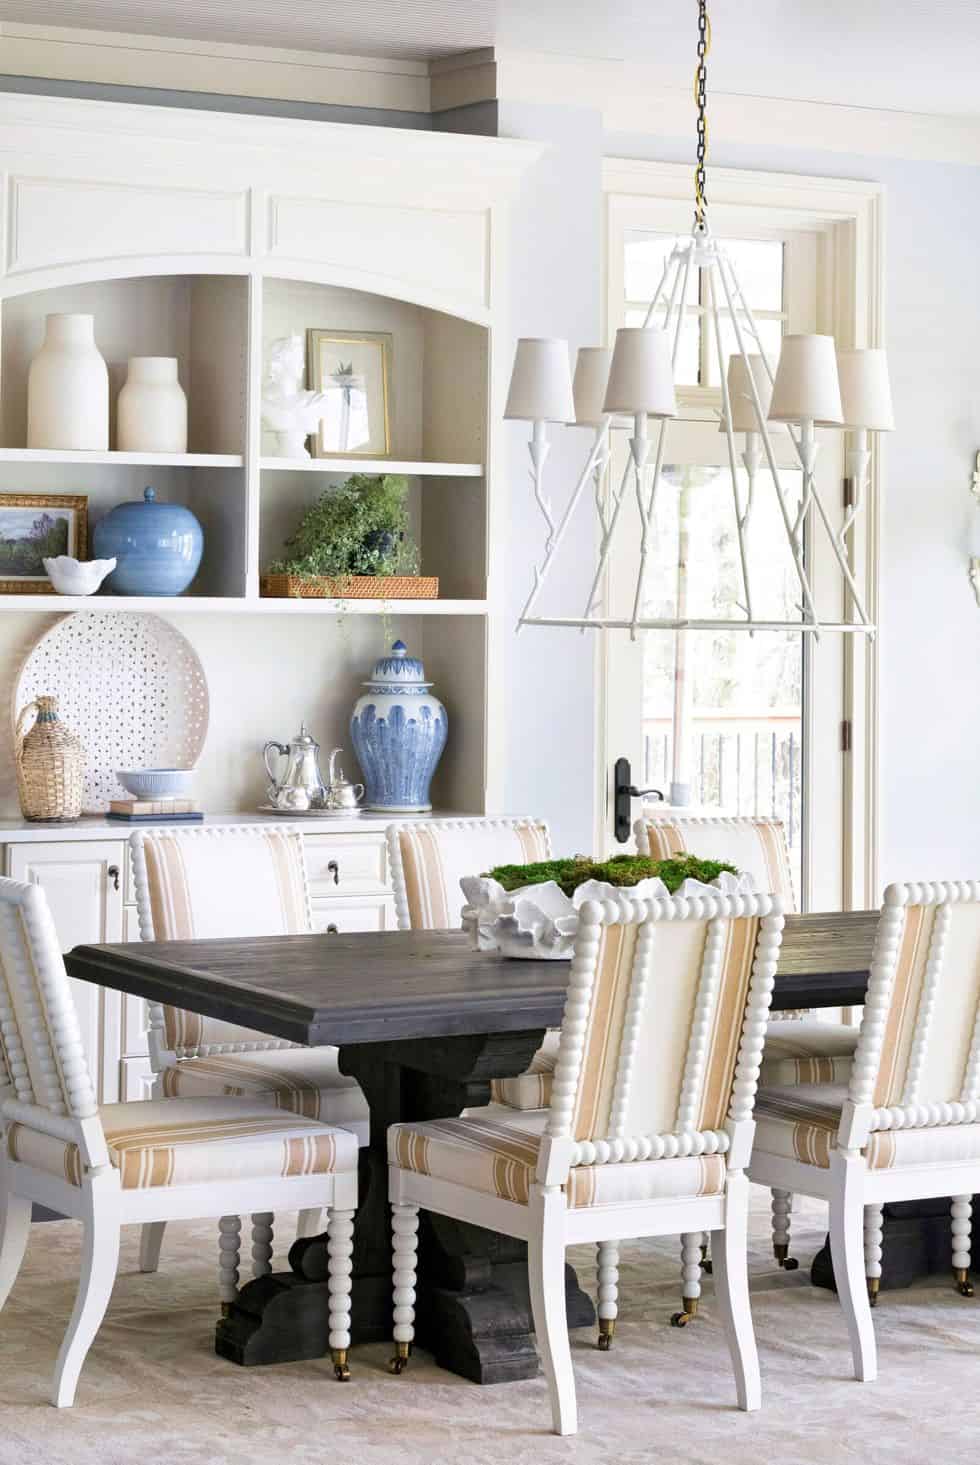  2020 Dining Room Trends   What to Expect